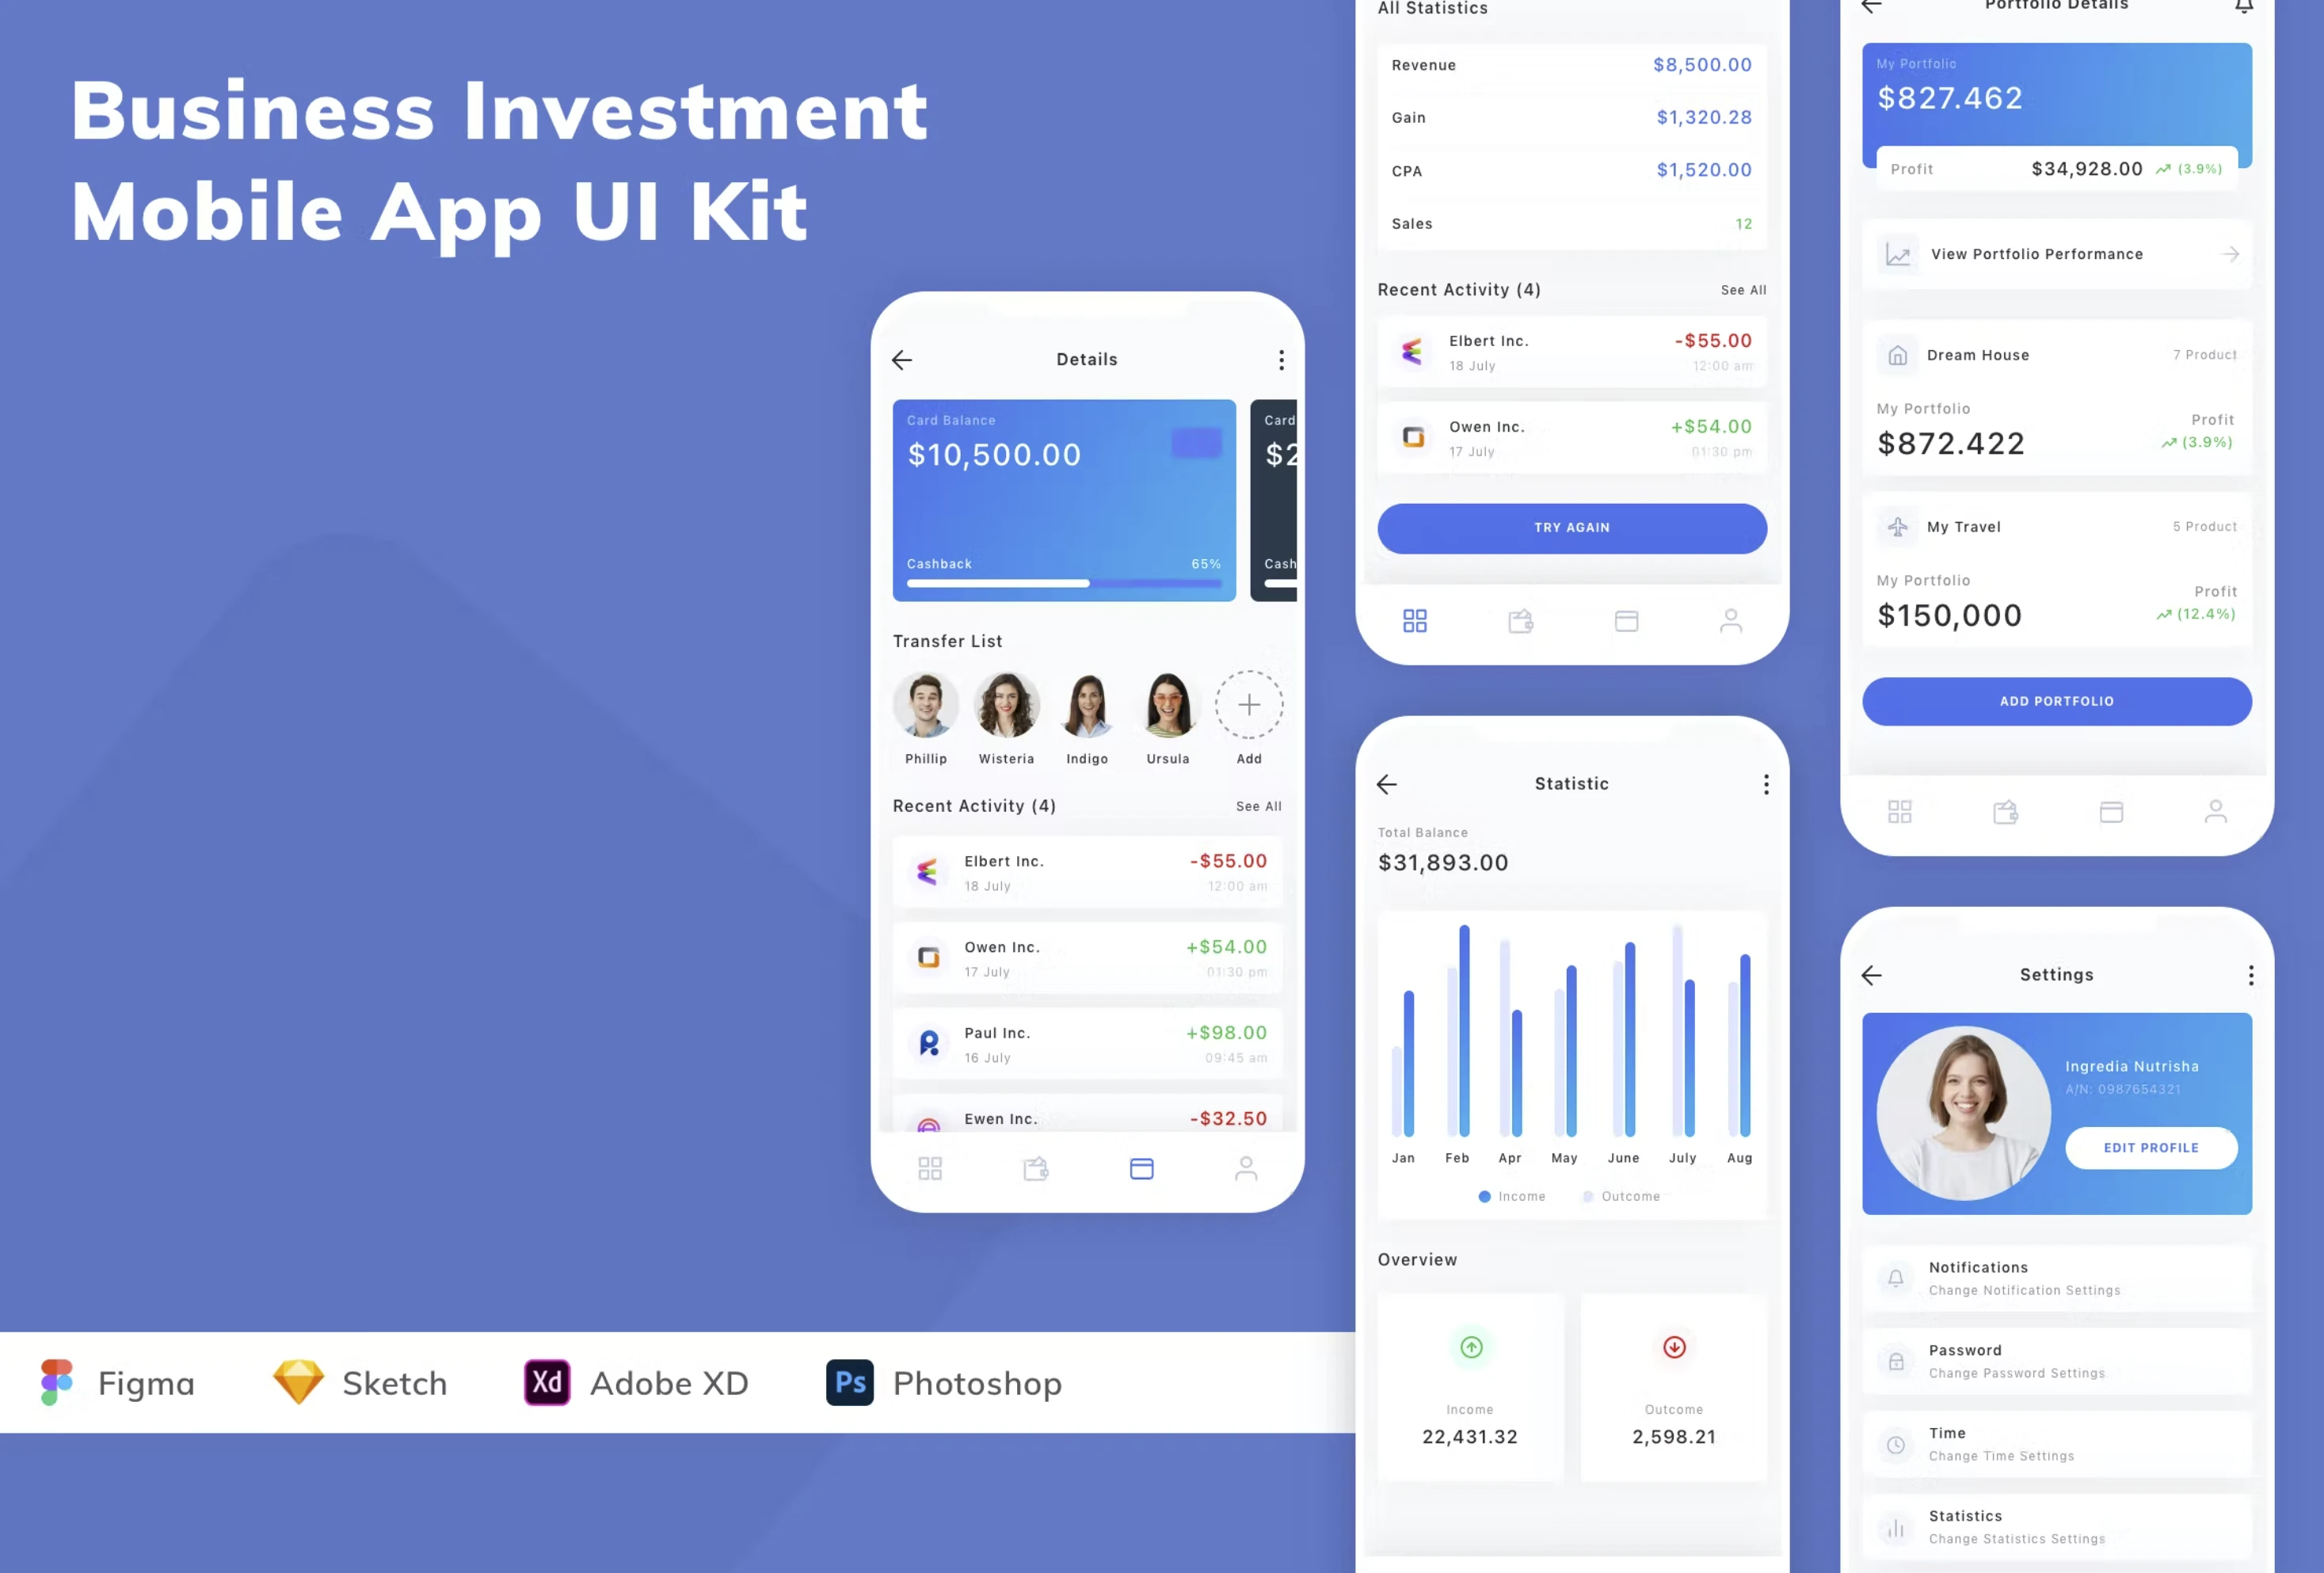 Figma UI kit - Business Investment Mobile App (Community) for Figma and Adobe XD